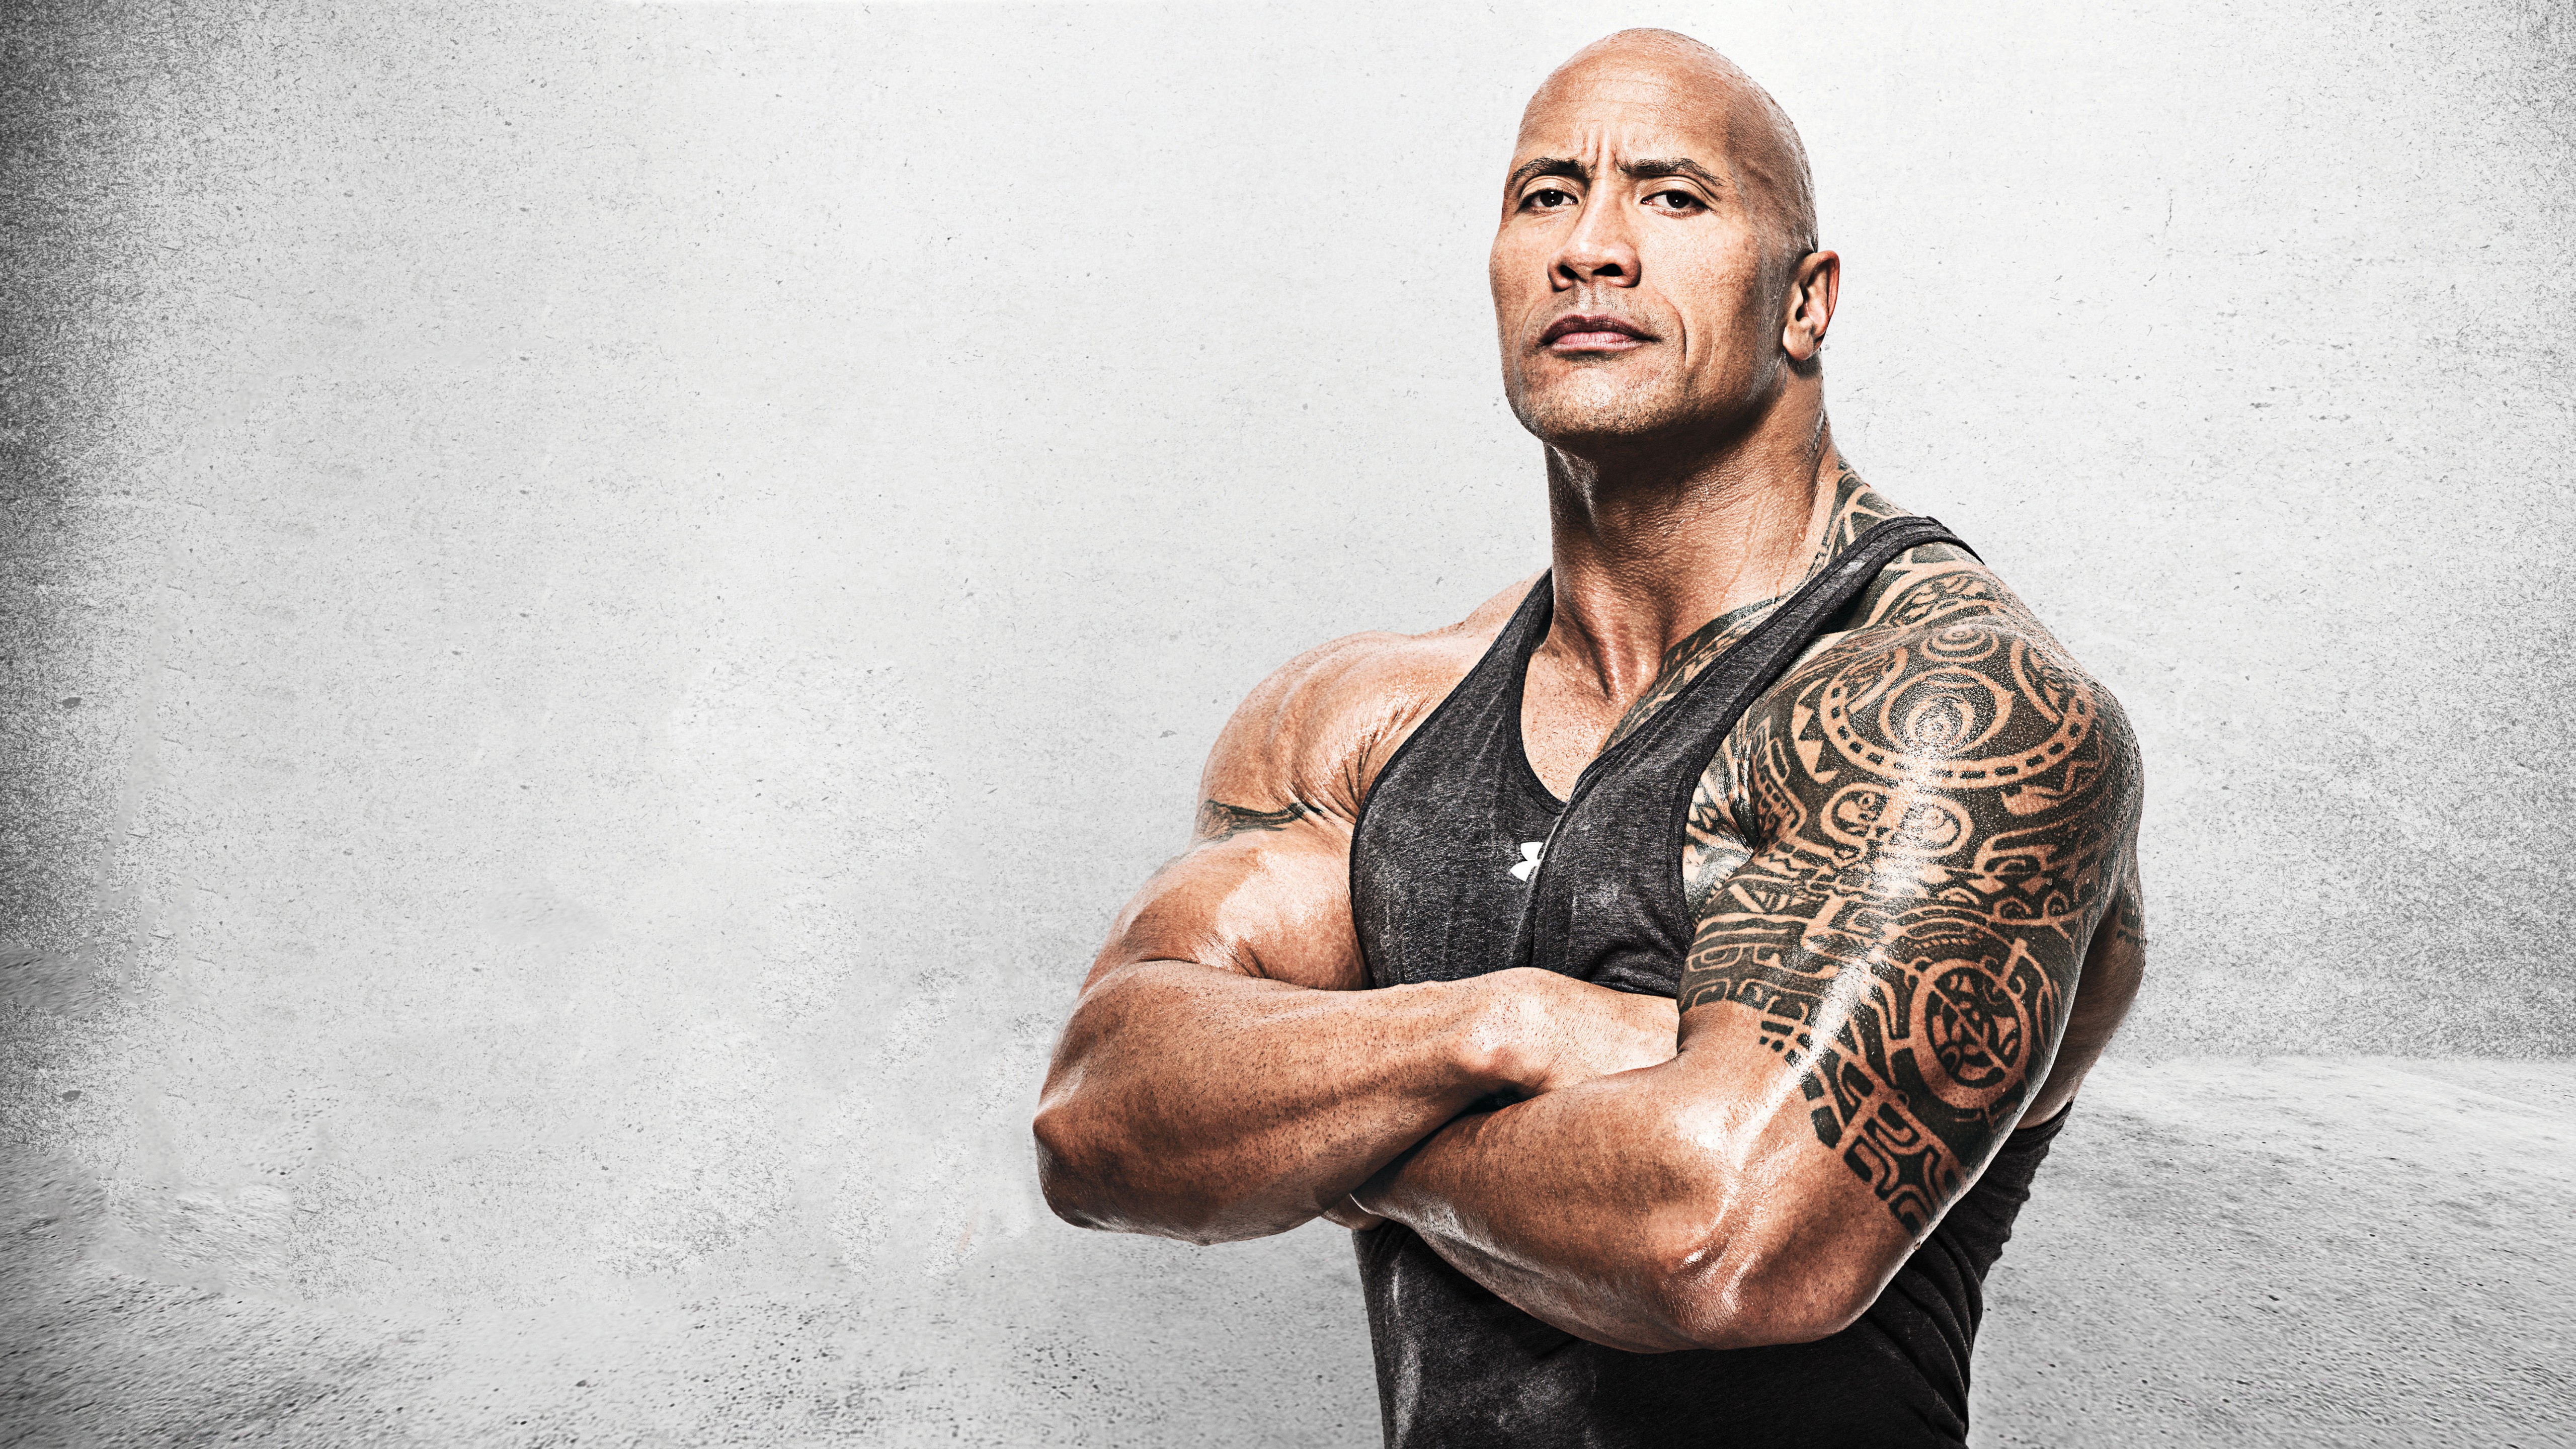 WWF SmackDown! Just Bring It Dwayne Johnson Tattoo Pain & Gain, The Rock,  professional Wrestling, poster png | PNGEgg